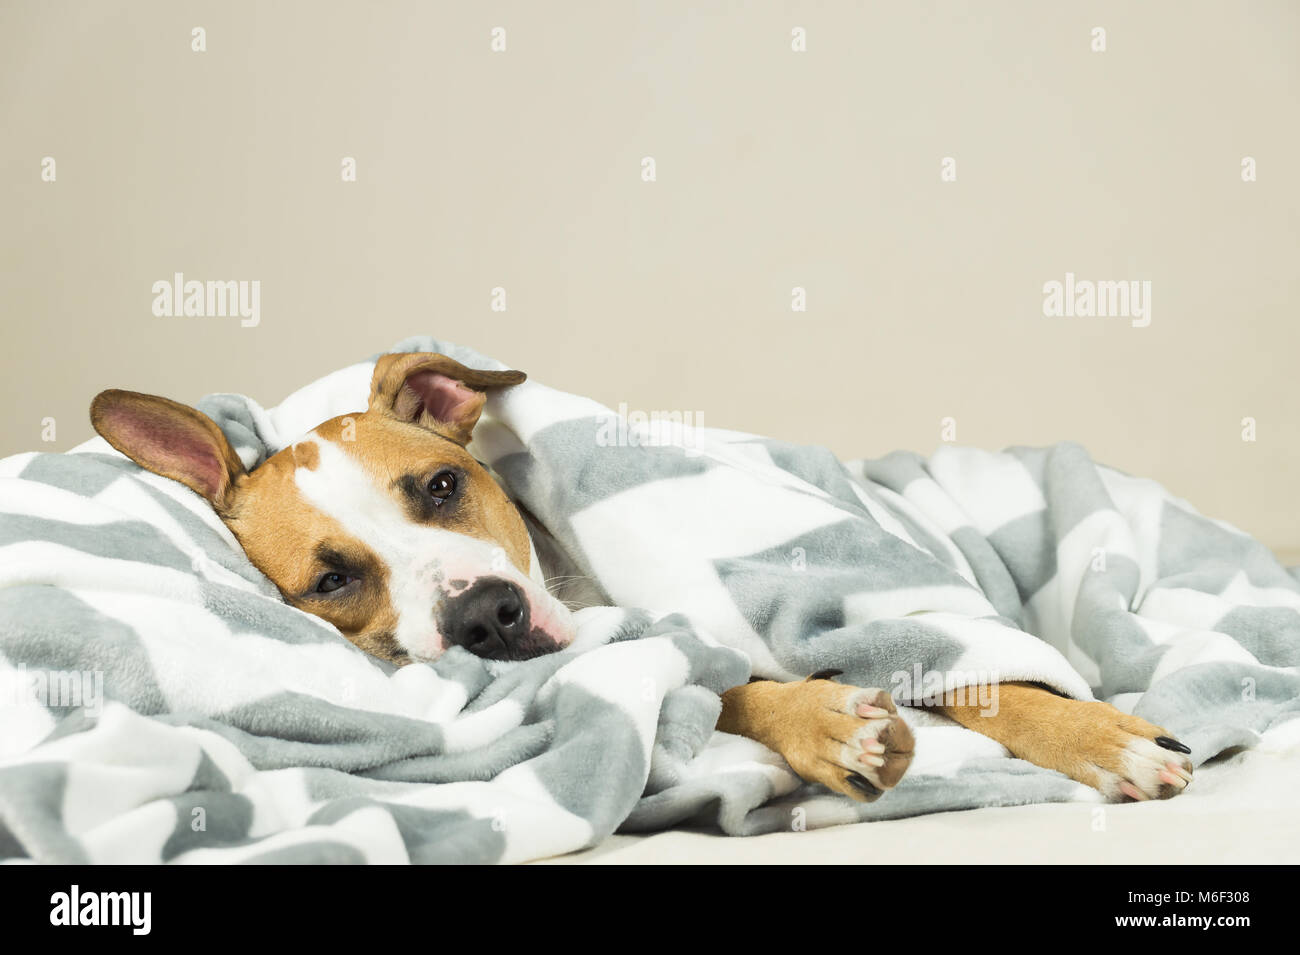 Funny young staffordshire terrier puppy lying covered in throw blanket and falling asleep. Tired or sick pitbull dog sleeping or resting under covers  Stock Photo